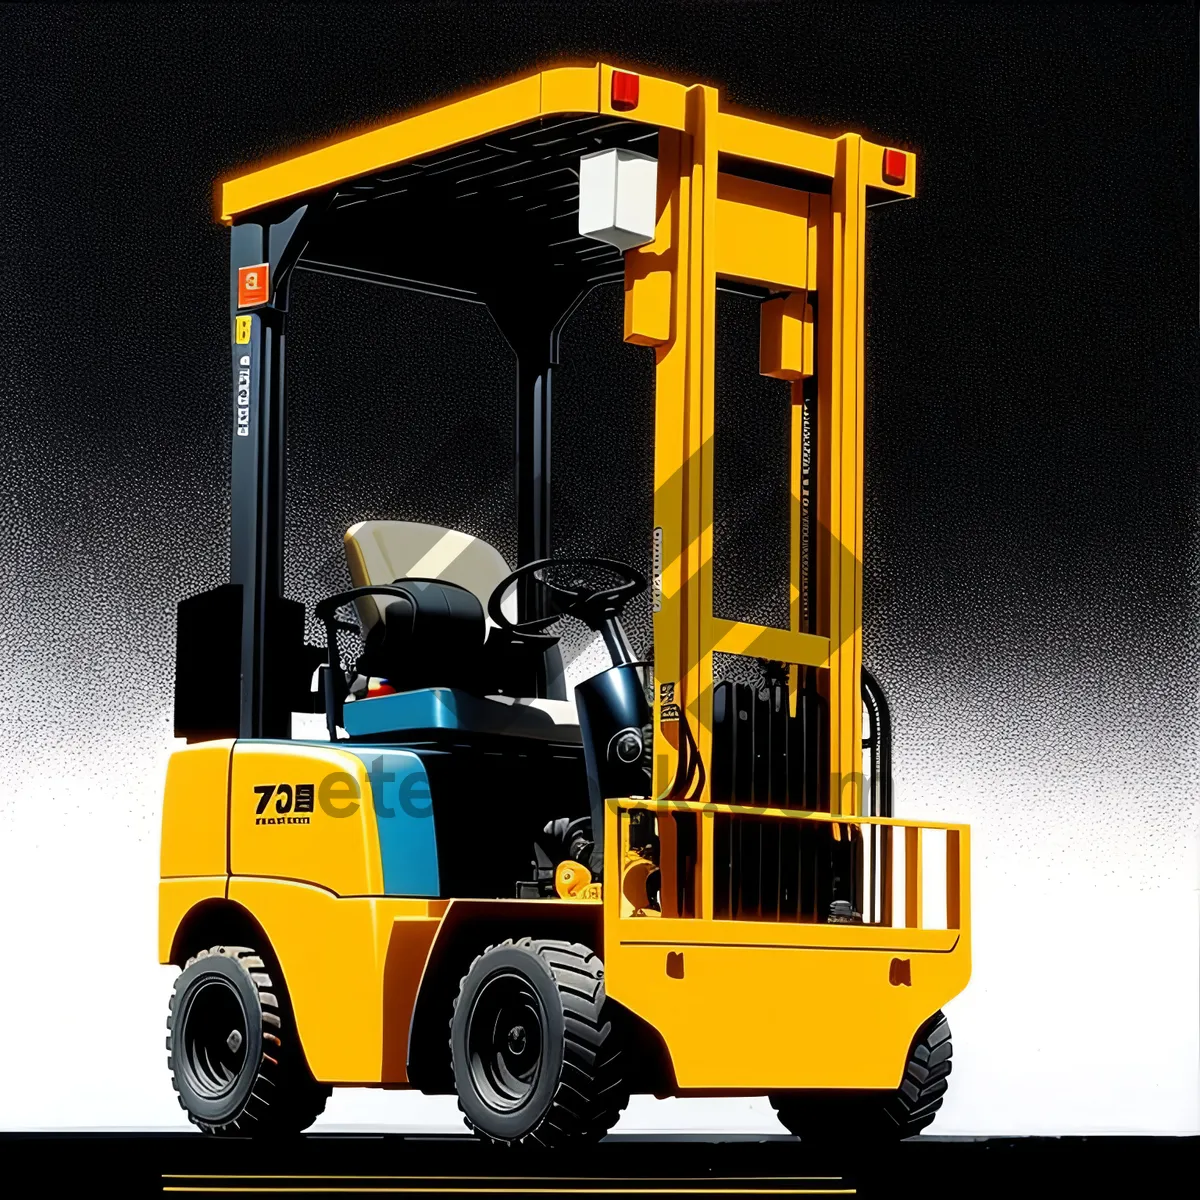 Picture of Yellow Forklift Loading Cargo in Warehouse